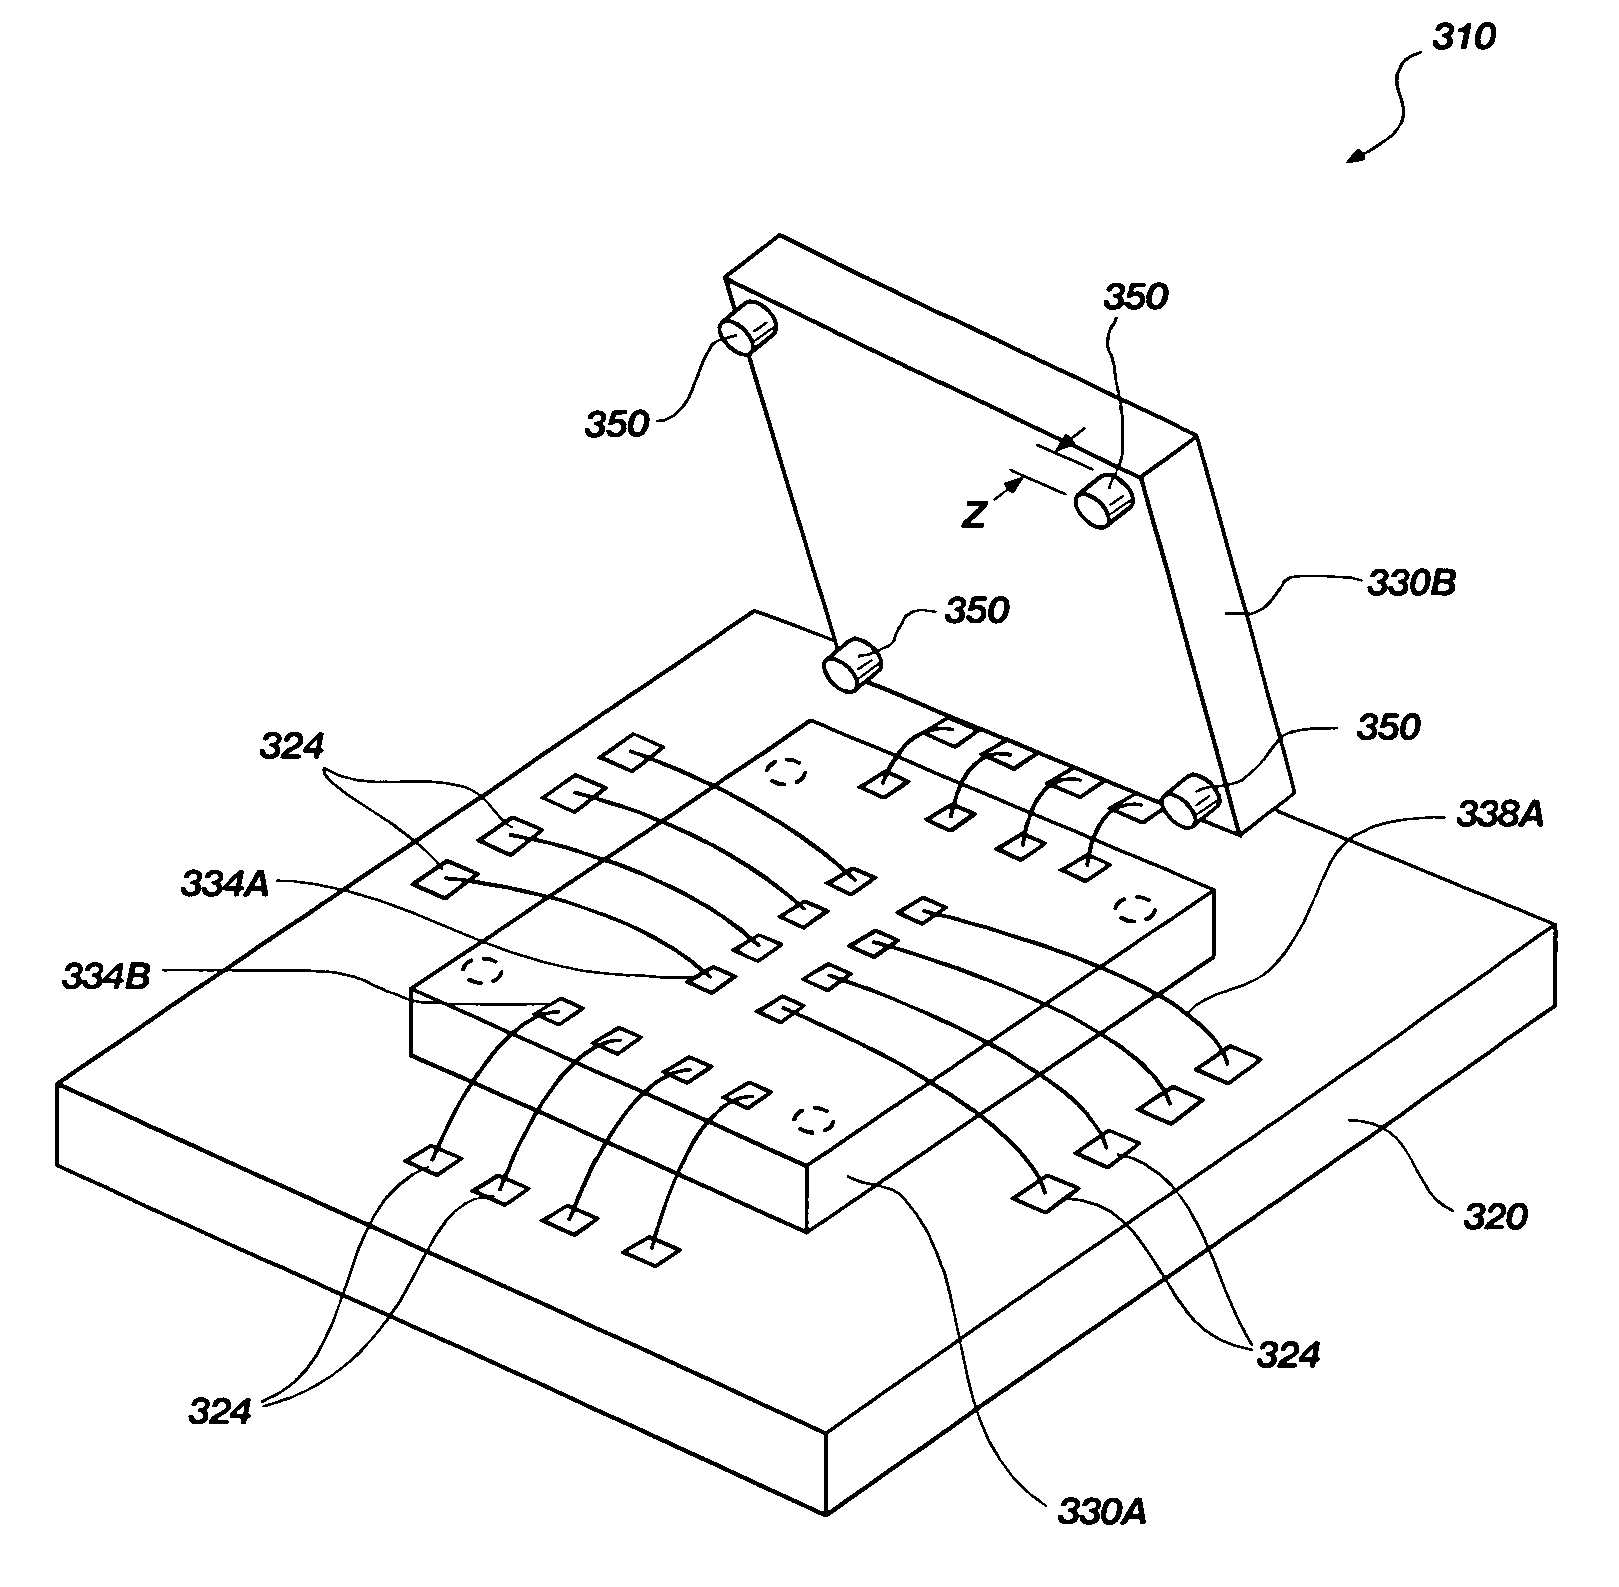 Assemblies and multi-chip modules including stacked semiconductor dice having centrally located, wire bonded bond pads